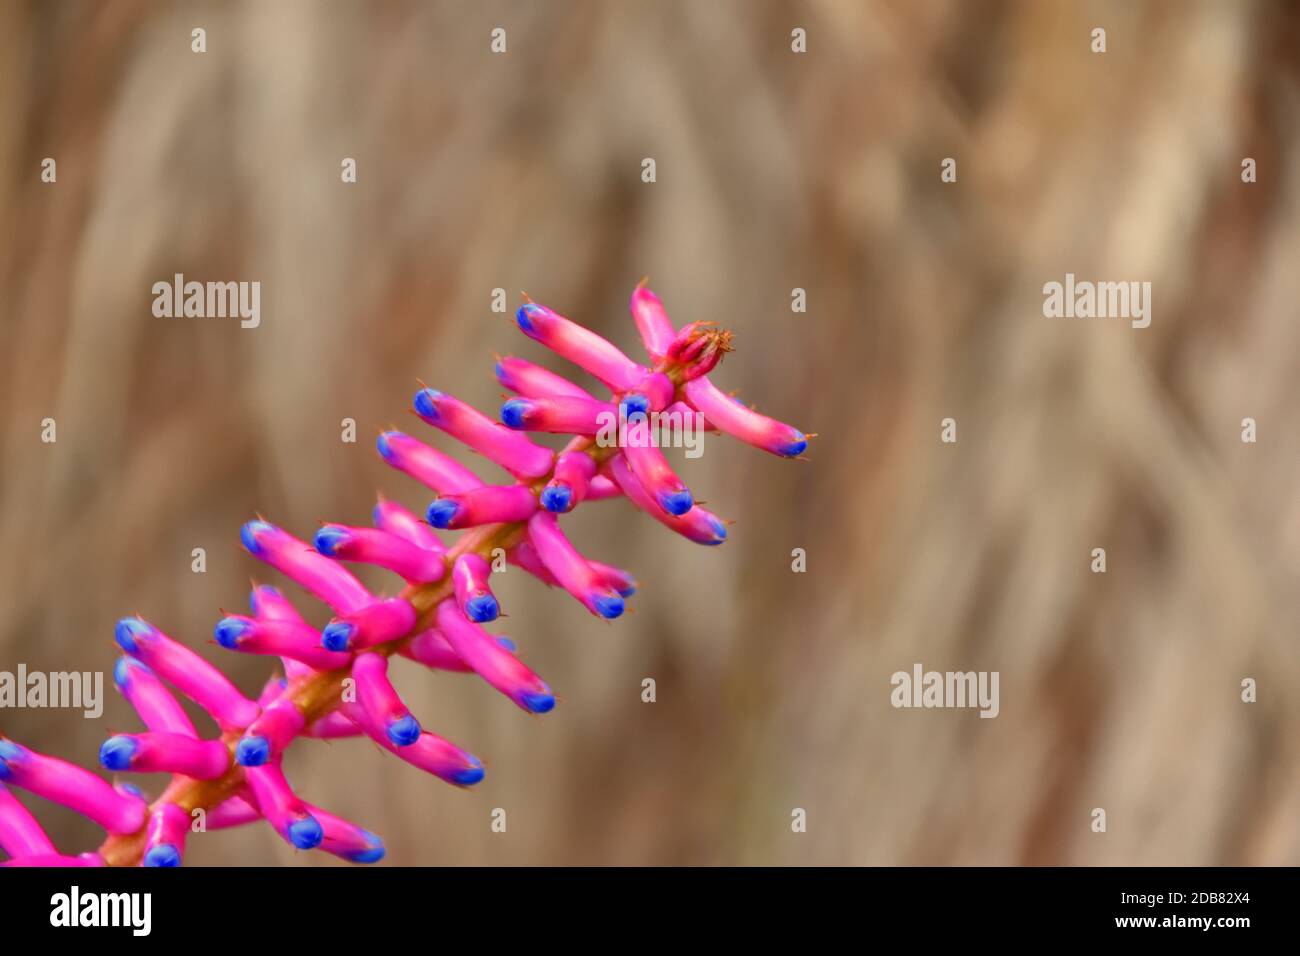 Pink and blue Aechmea flower on a plain background Stock Photo